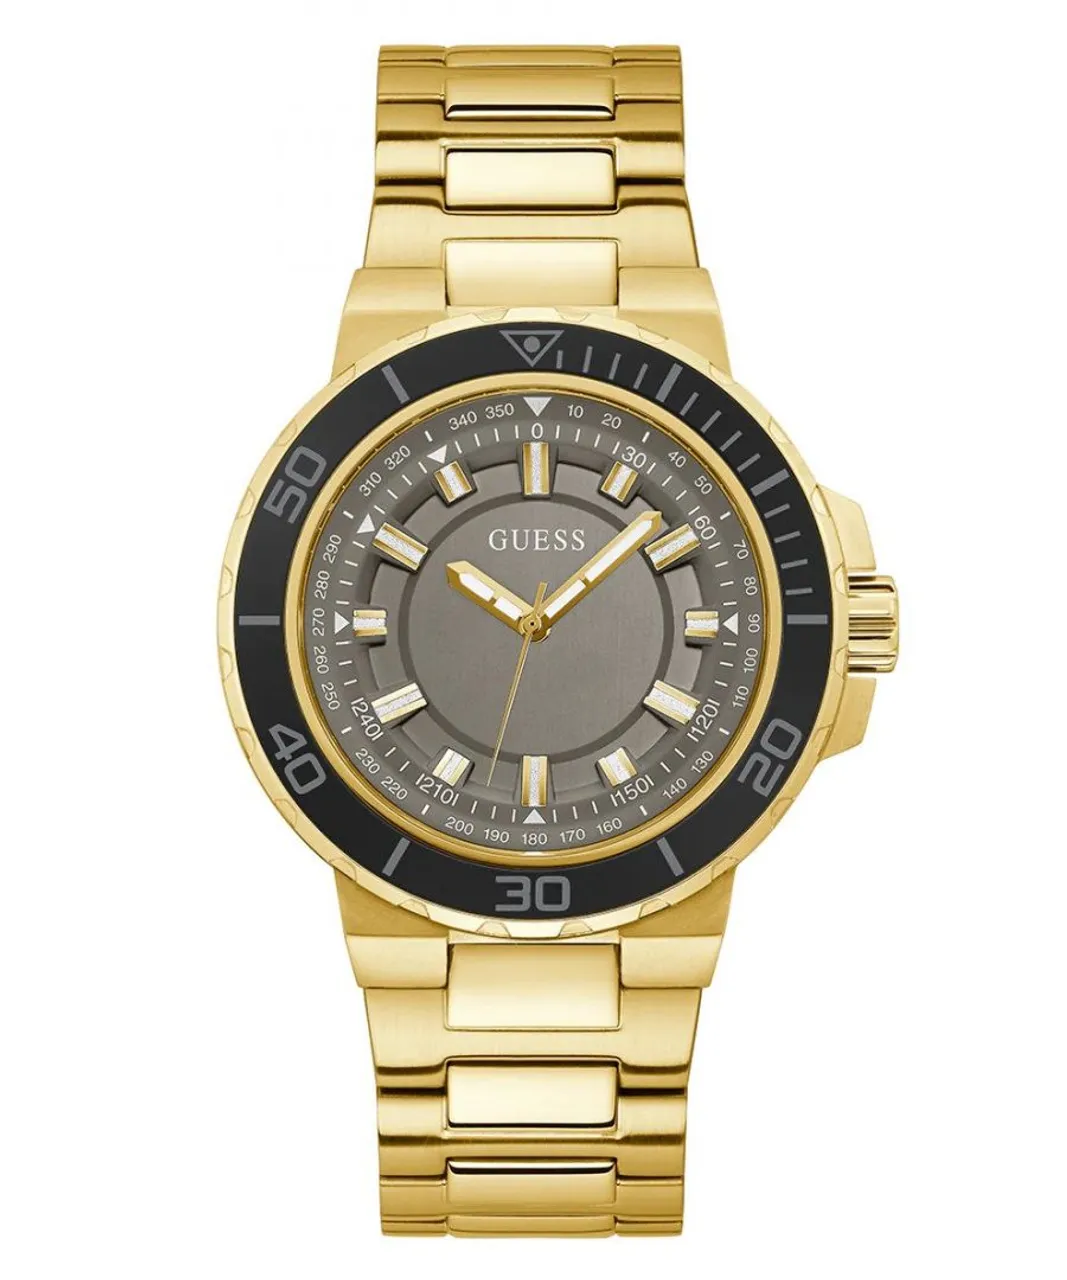 Guess Track Mens Gold Watch GW0426G2 Stainless Steel (archived) - One Size